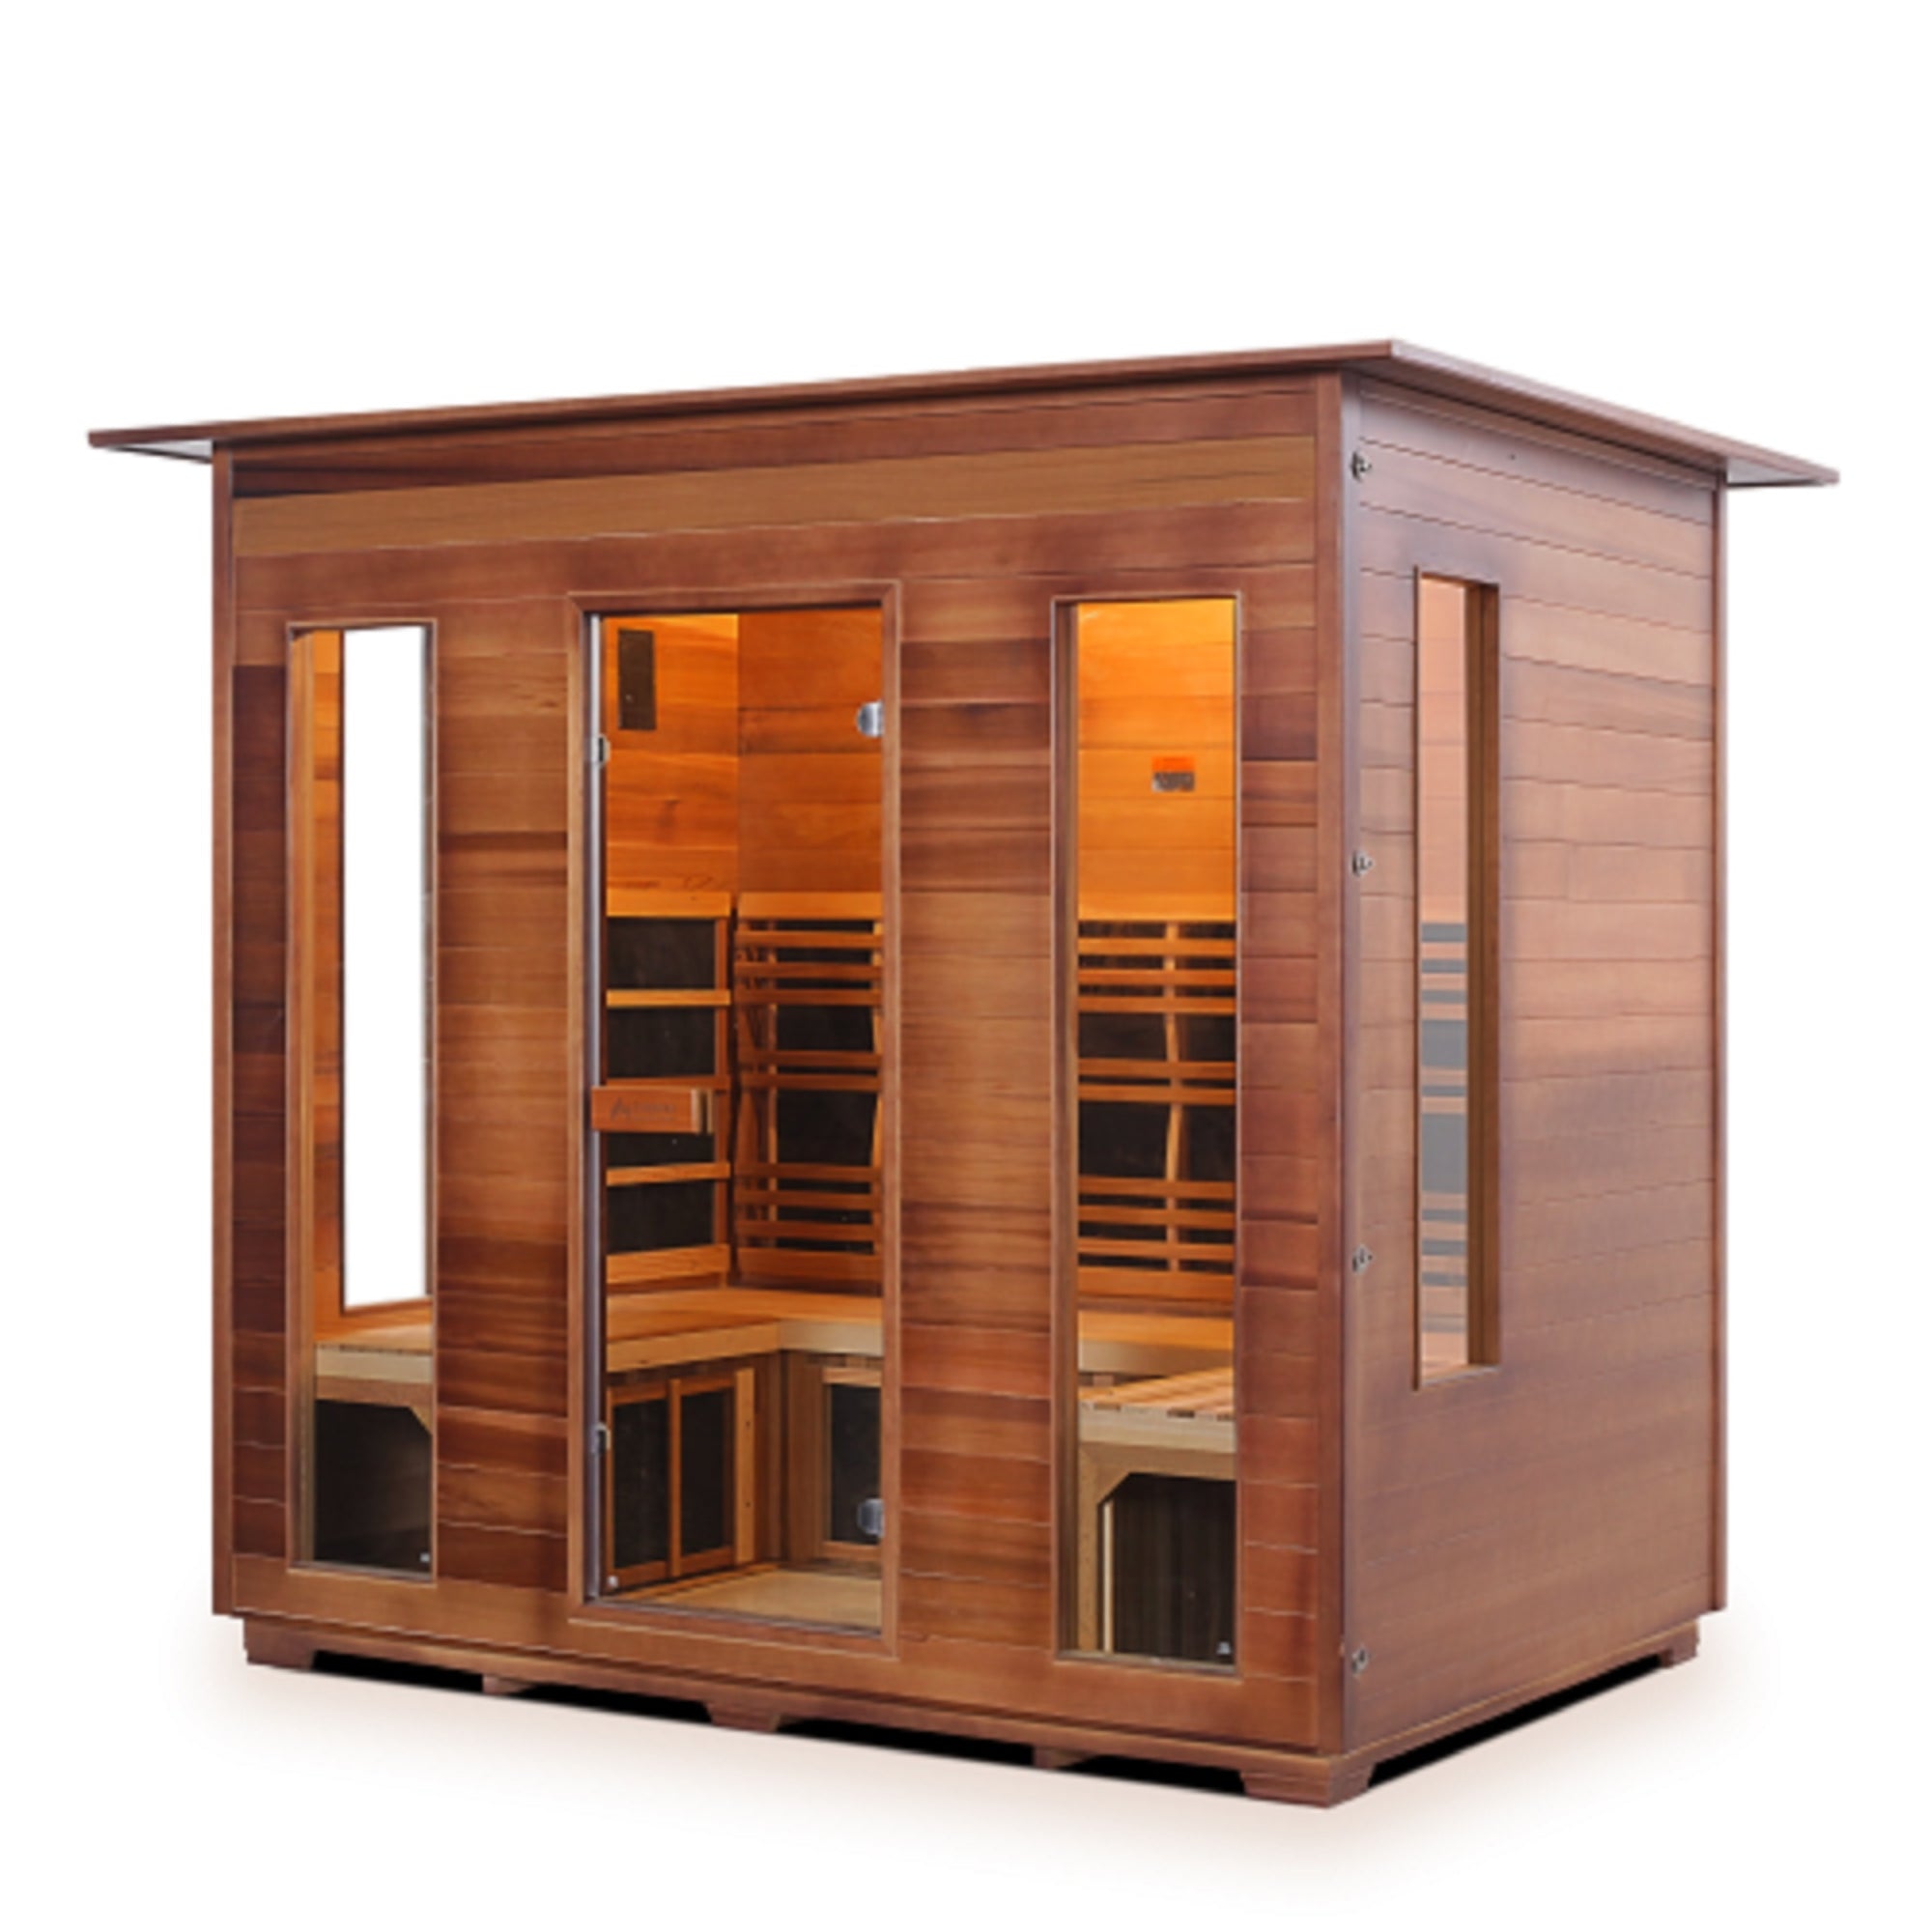 Enlighten Sauna Infrared/Traditional DIAMOND Canadian Red Cedar Wood Outside And Inside indoor Roofed five person sauna with glass door and windows isometric view